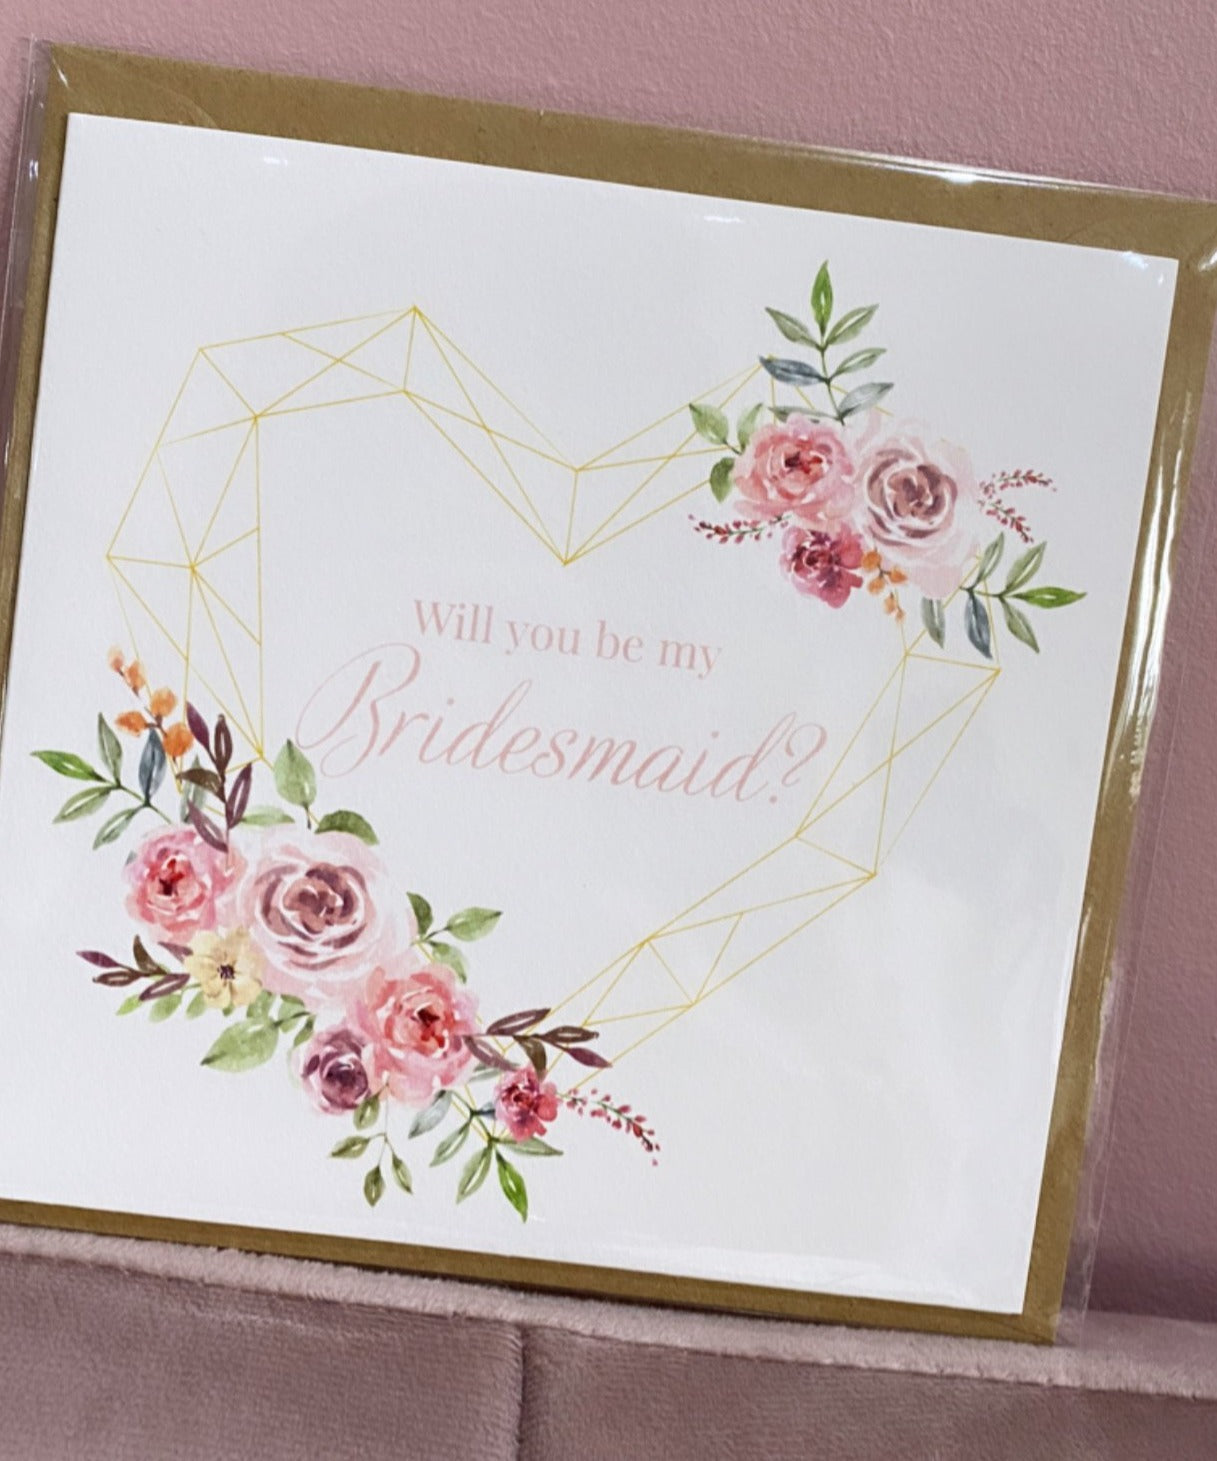 ‘Will you be my bridesmaid’? Card (Rustic Flower)